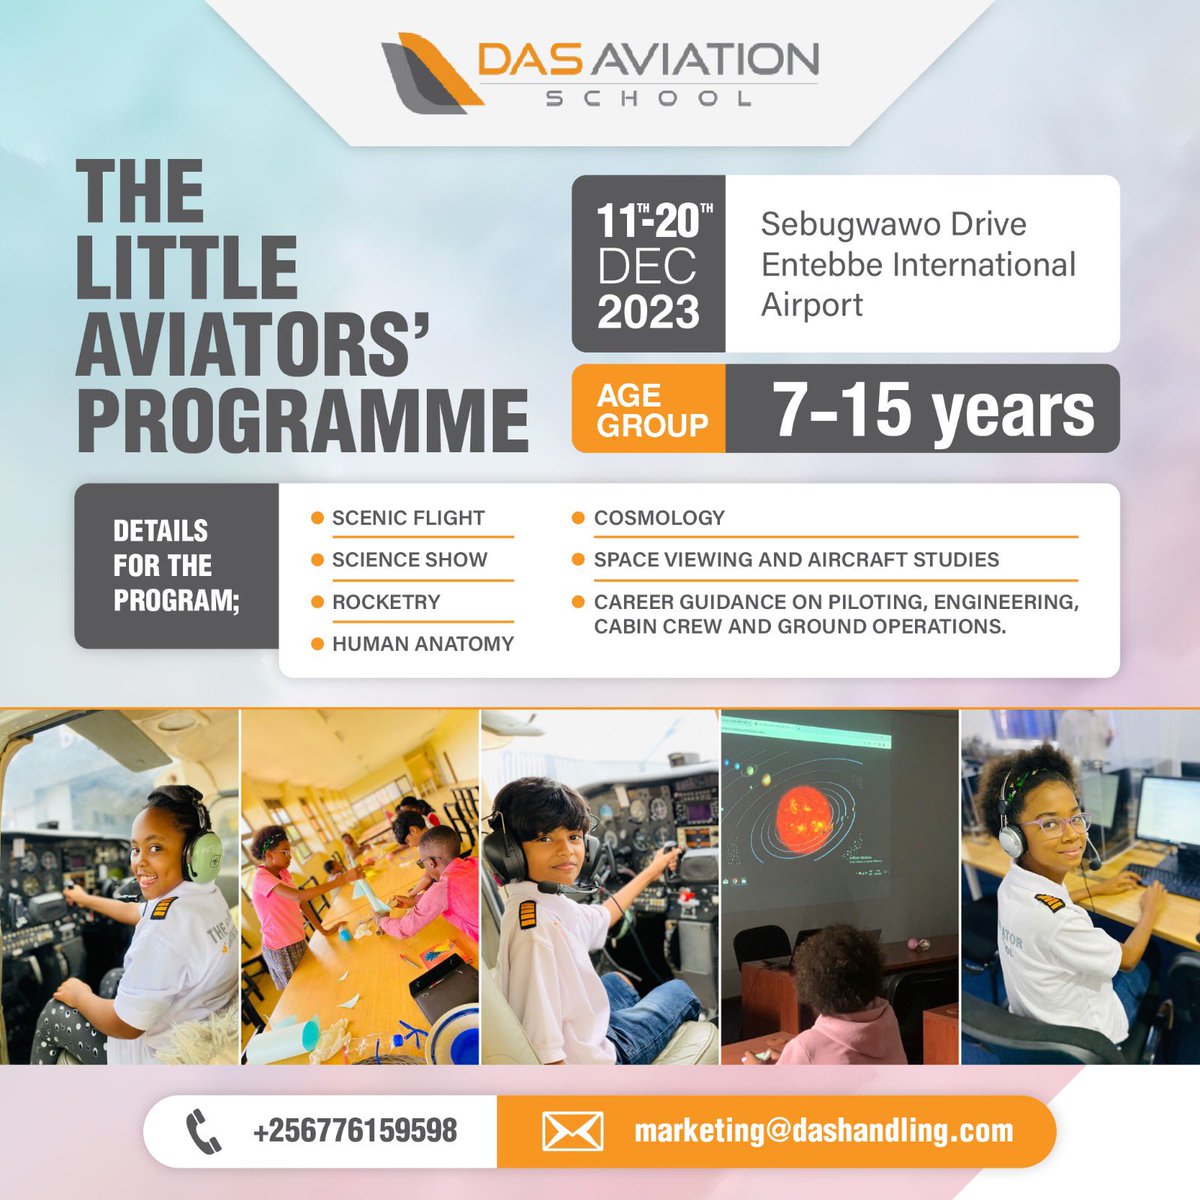 Calling all young aviators aged 7 to 15! Don't miss The Little Aviators' Programme this December, where you'll learn about aviation, explore careers, and have a blast. ✨👩‍✈️ #YoungAviators #December2023 #AviationEducation